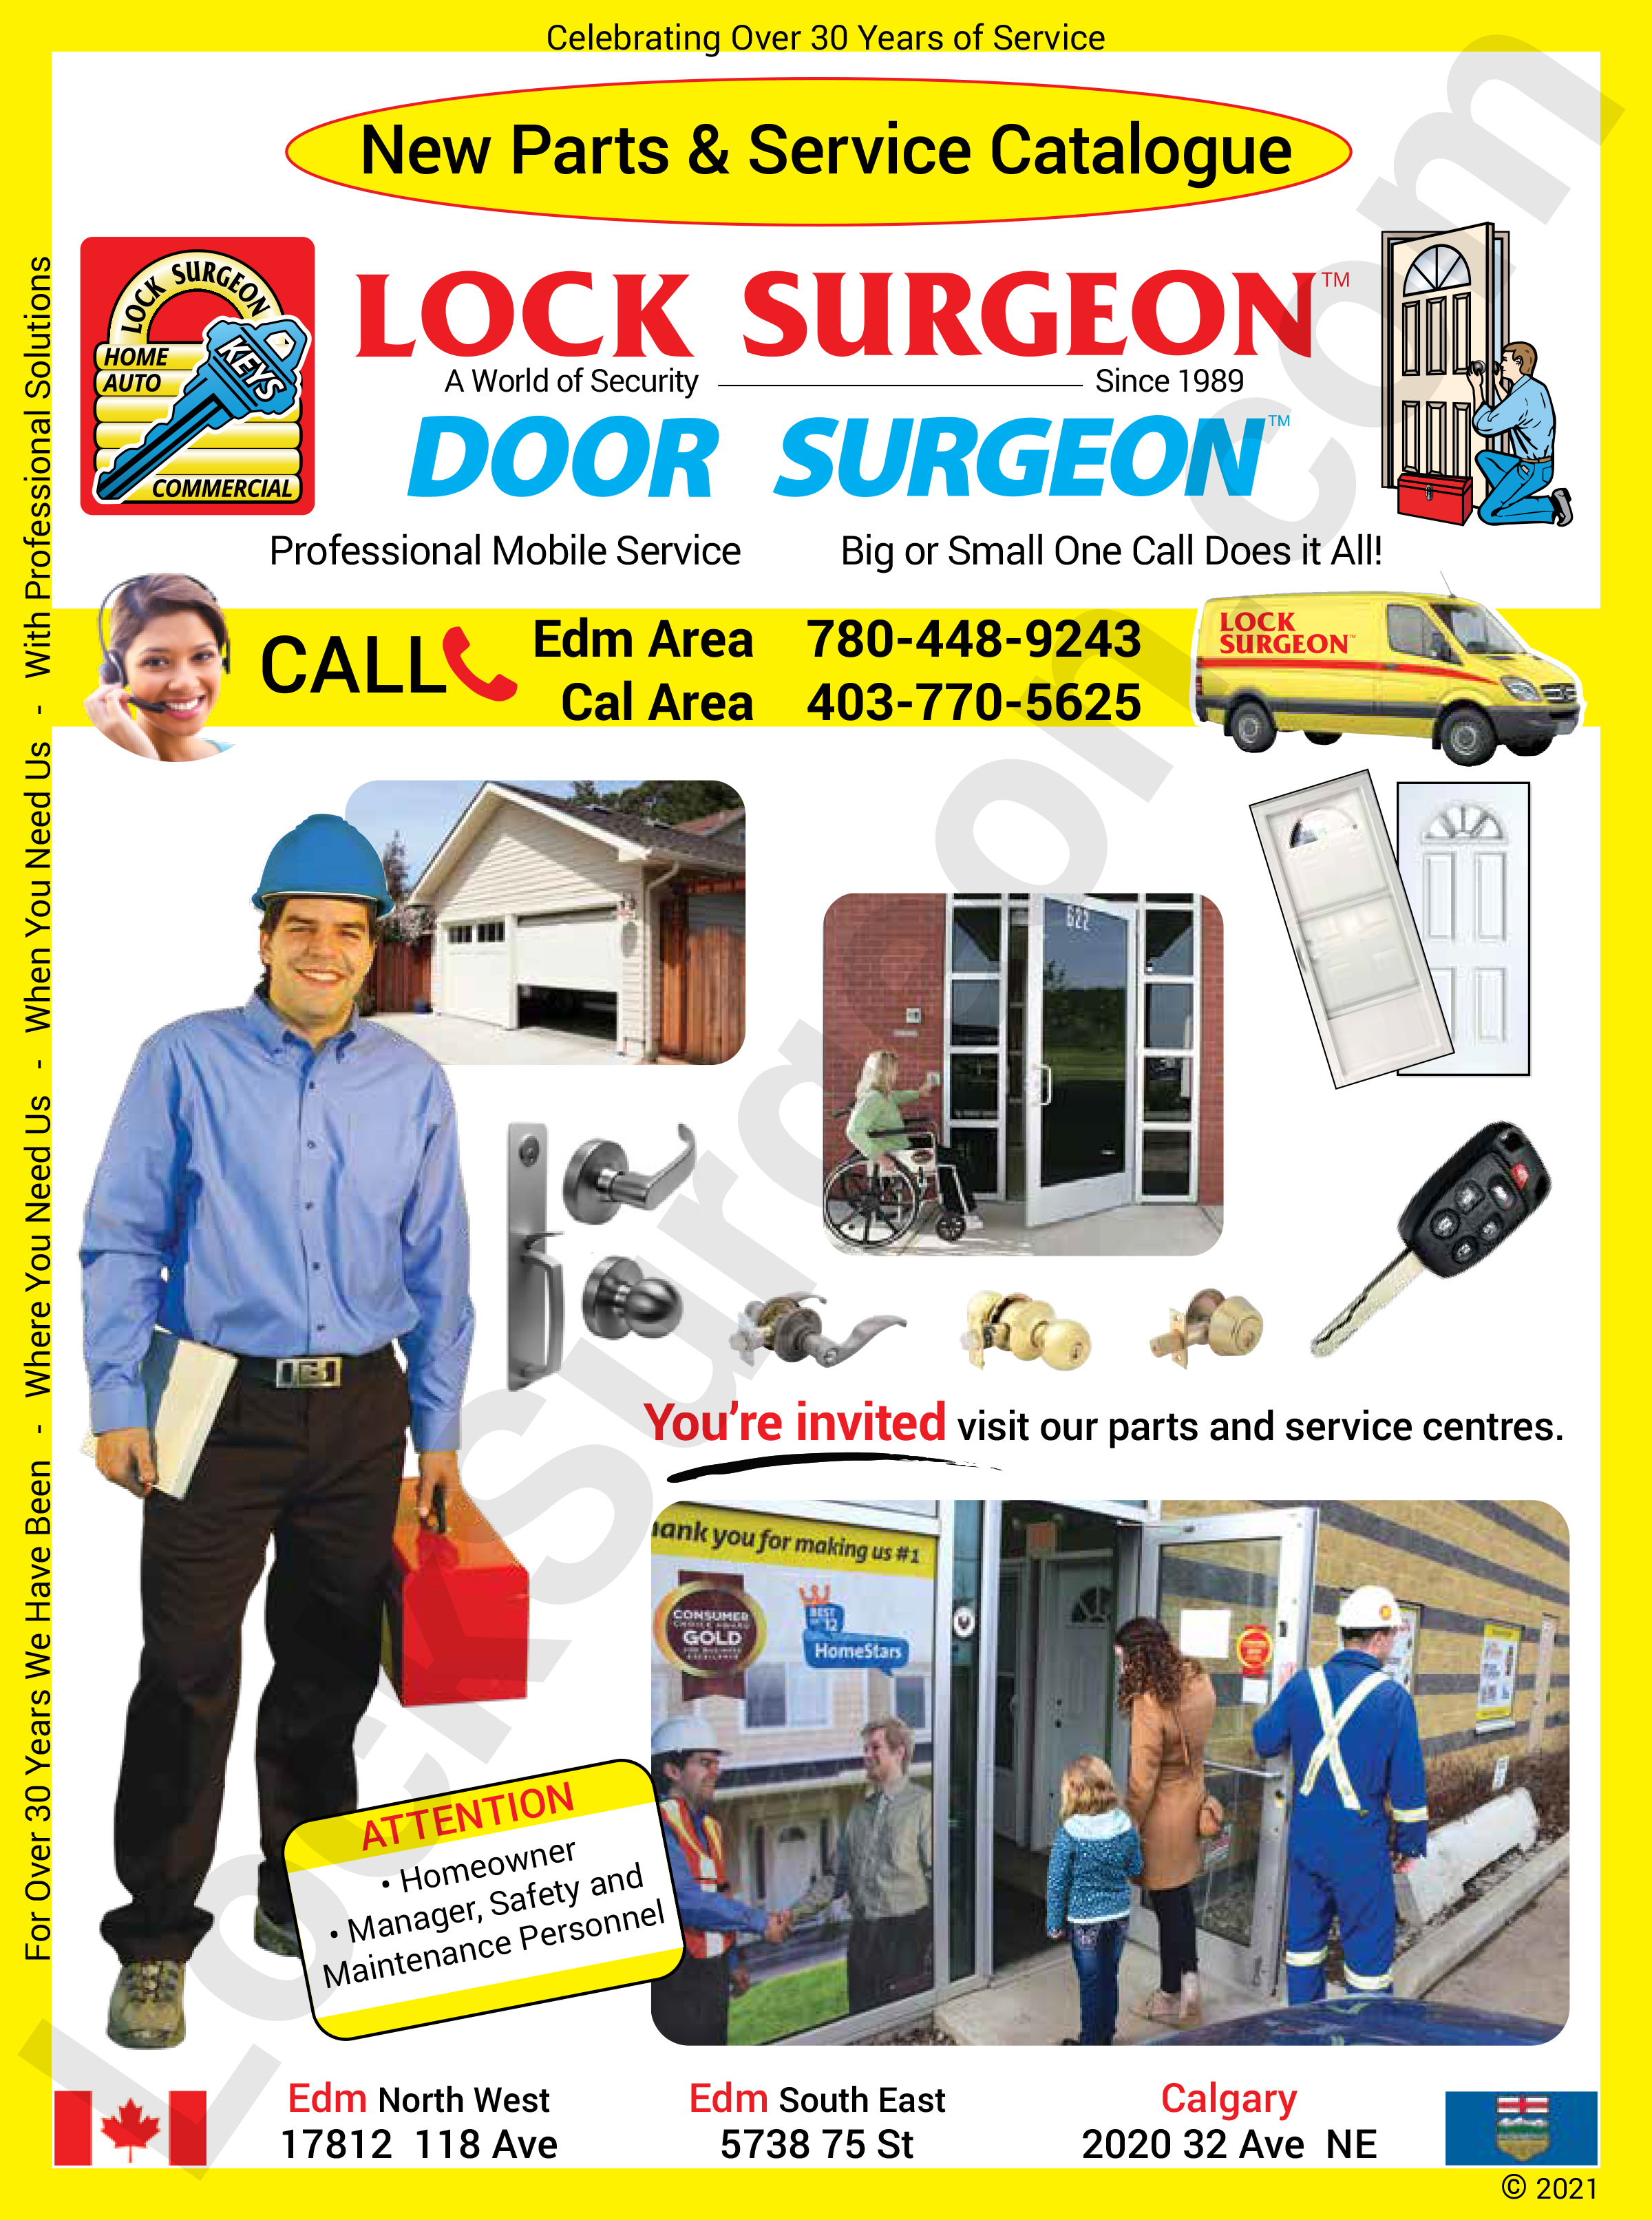 Lock Surgeon Edmonton South Provide On-Site Mobile Service & Parts as well as In-Shop Locksmith.